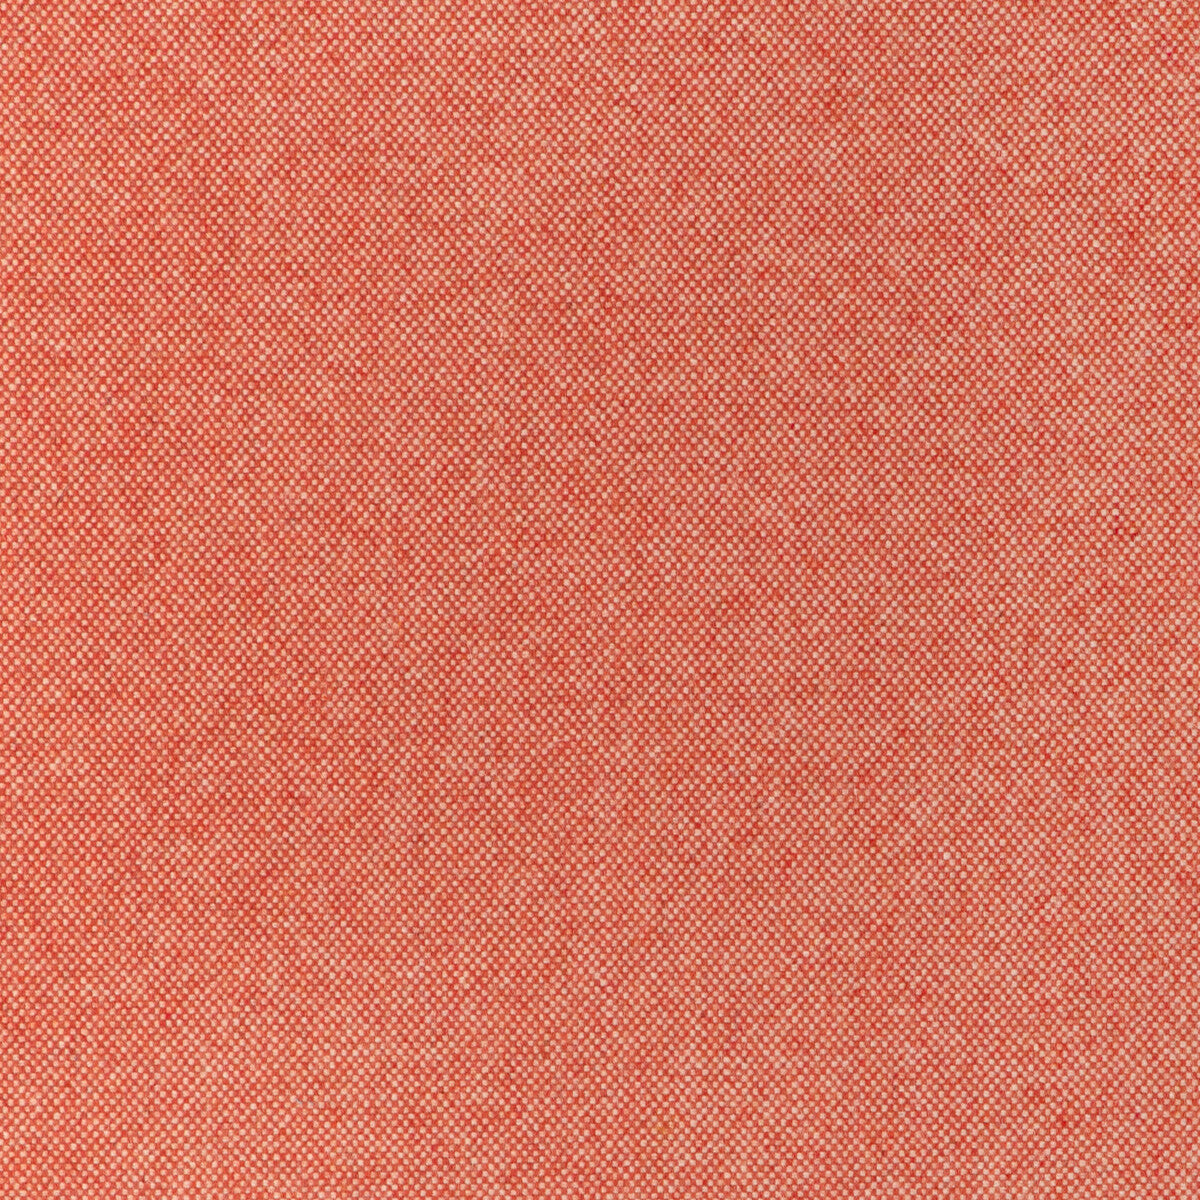 Manchester Wool fabric in persimmon color - pattern 37026.19.0 - by Kravet Contract